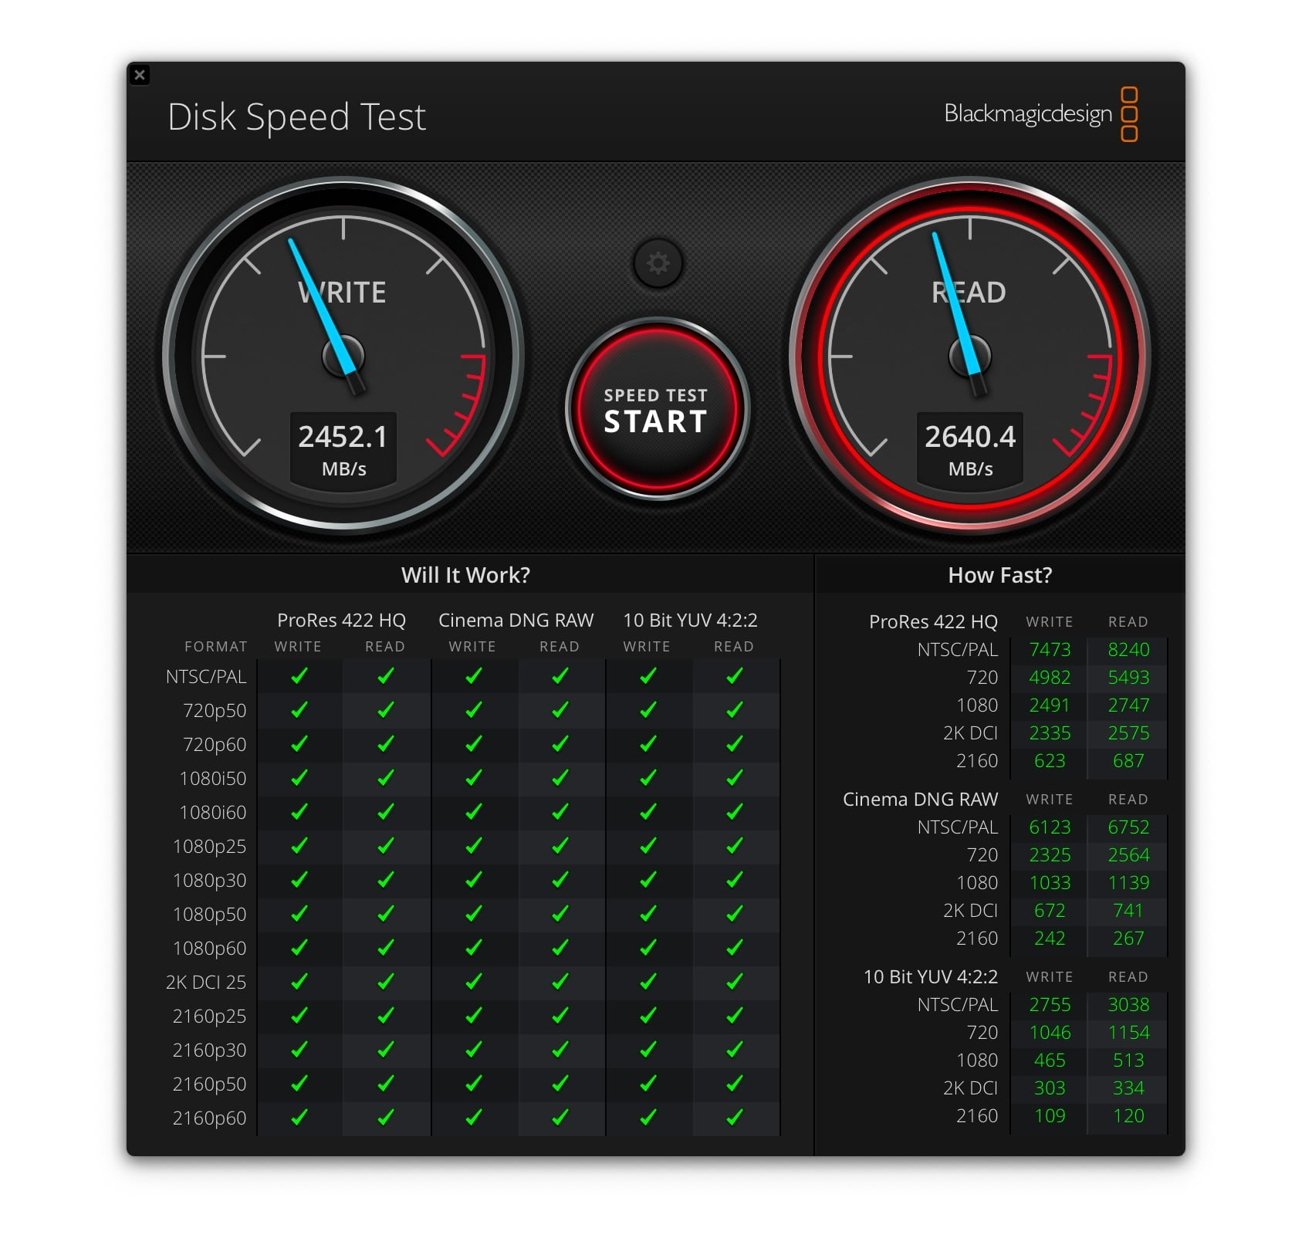 Test results for the GigaDrive Pro 1TB under BlackMagicDesign's Disk Speed Test. 